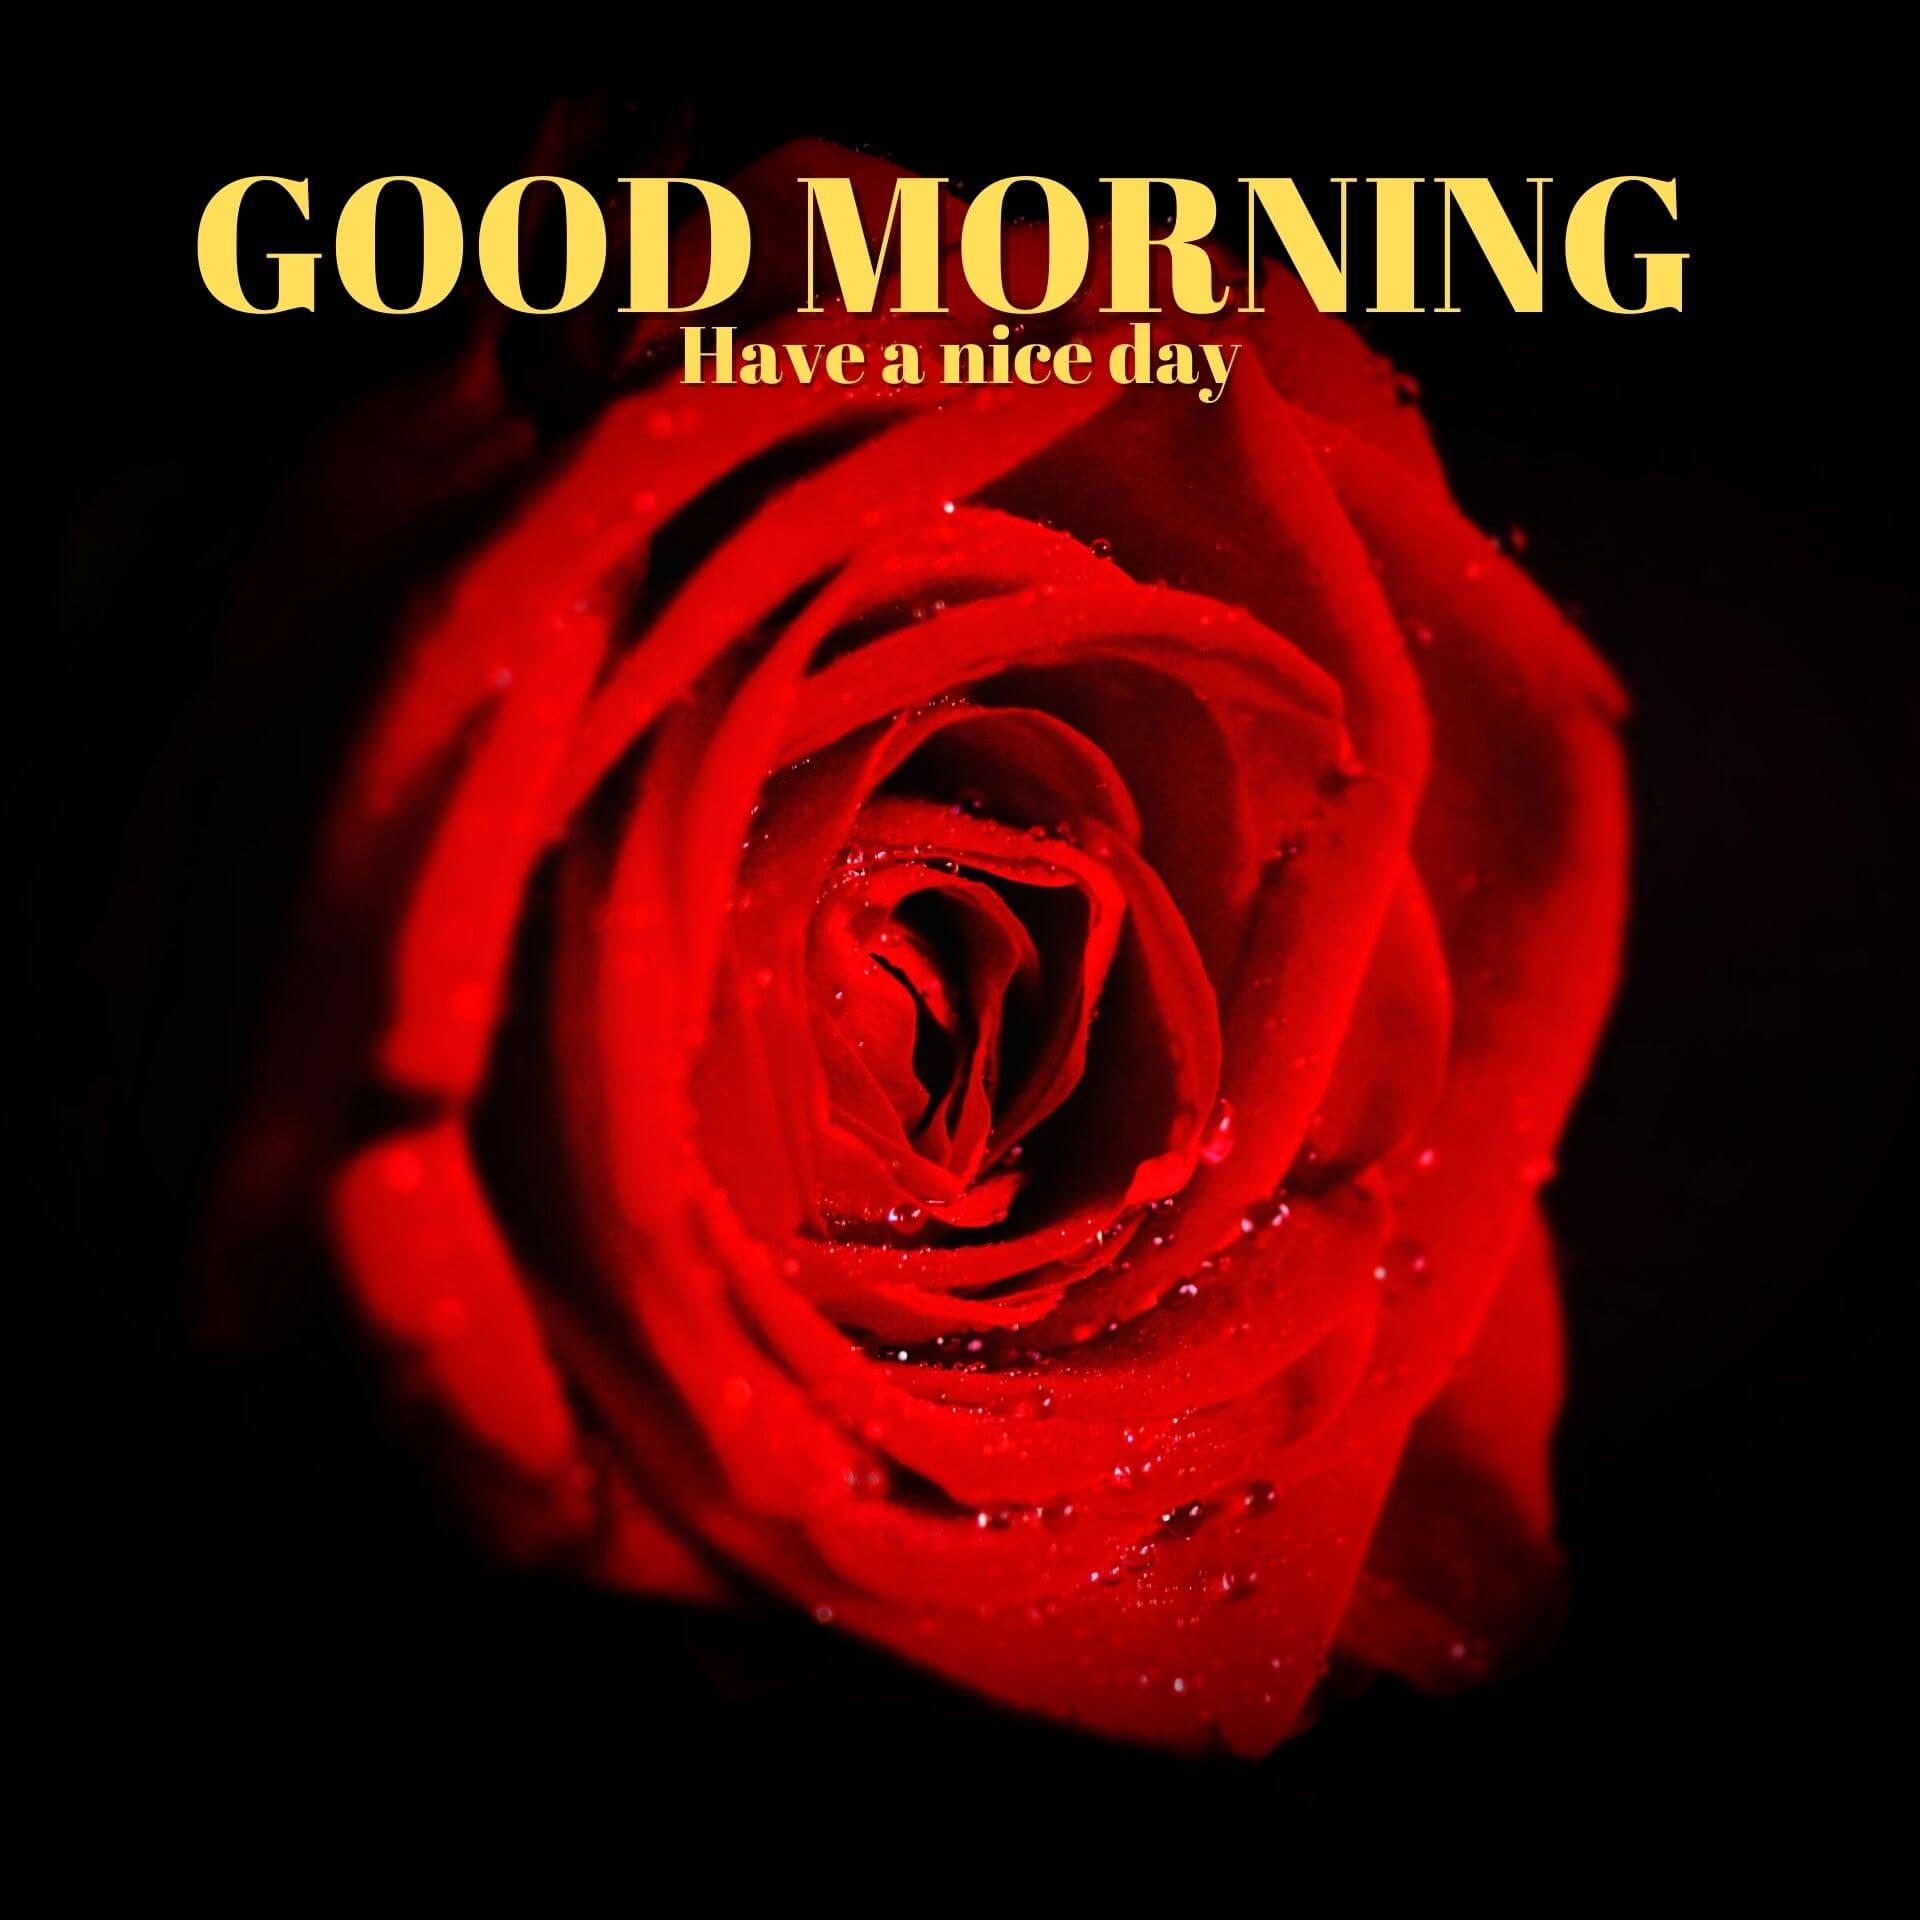 Good morning have a nice day Wallpaper Images With Red Rose